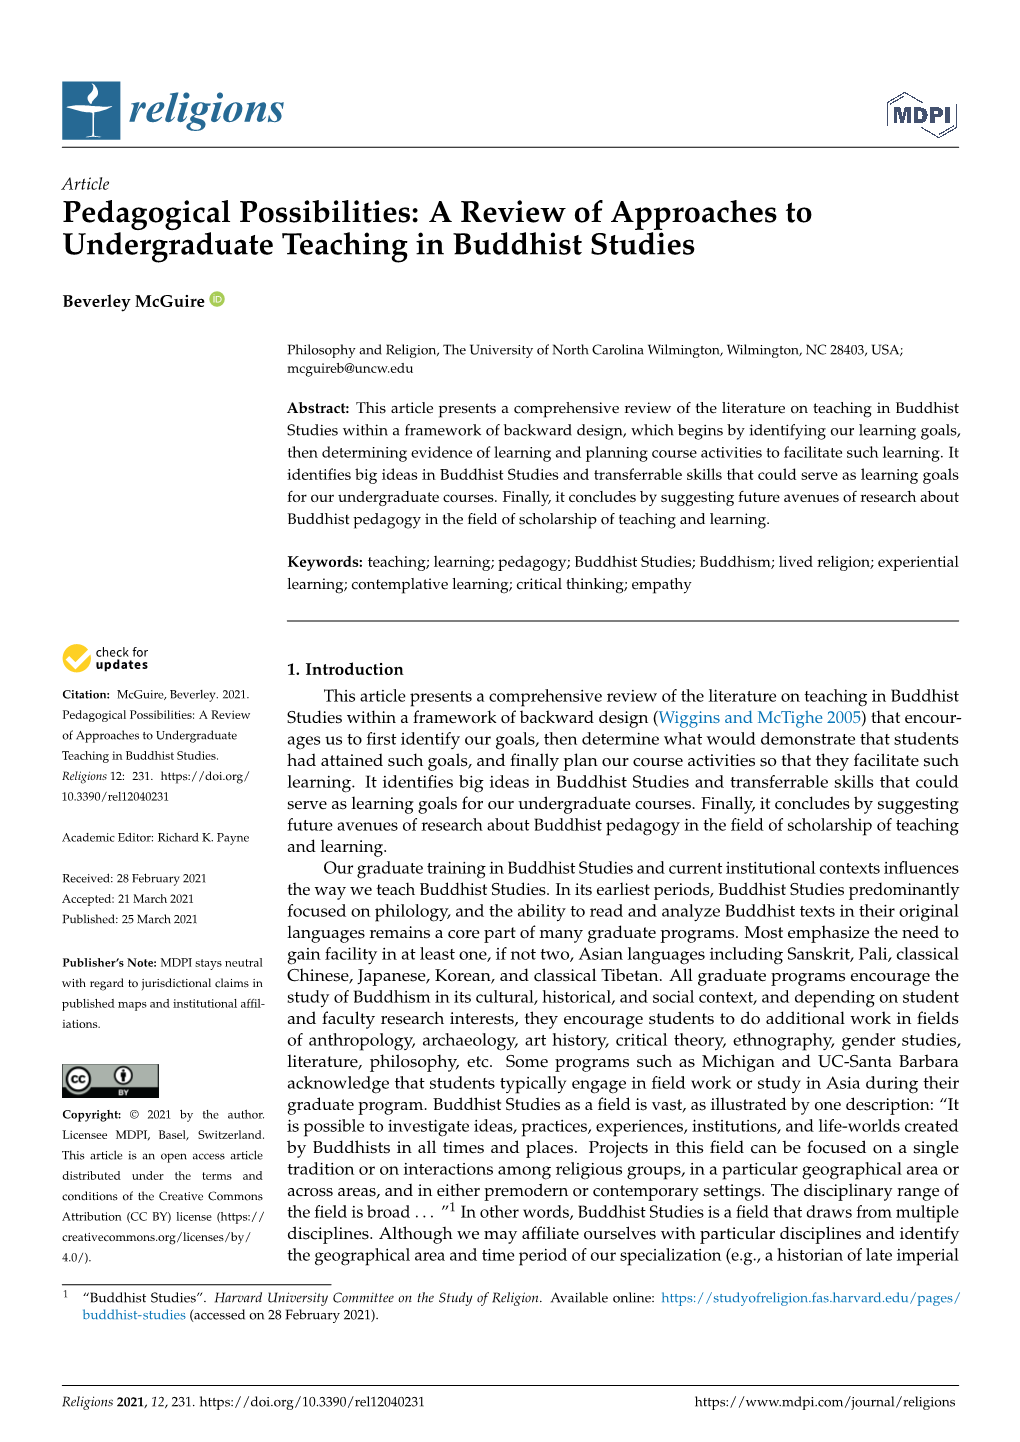 Pedagogical Possibilities: a Review of Approaches to Undergraduate Teaching in Buddhist Studies